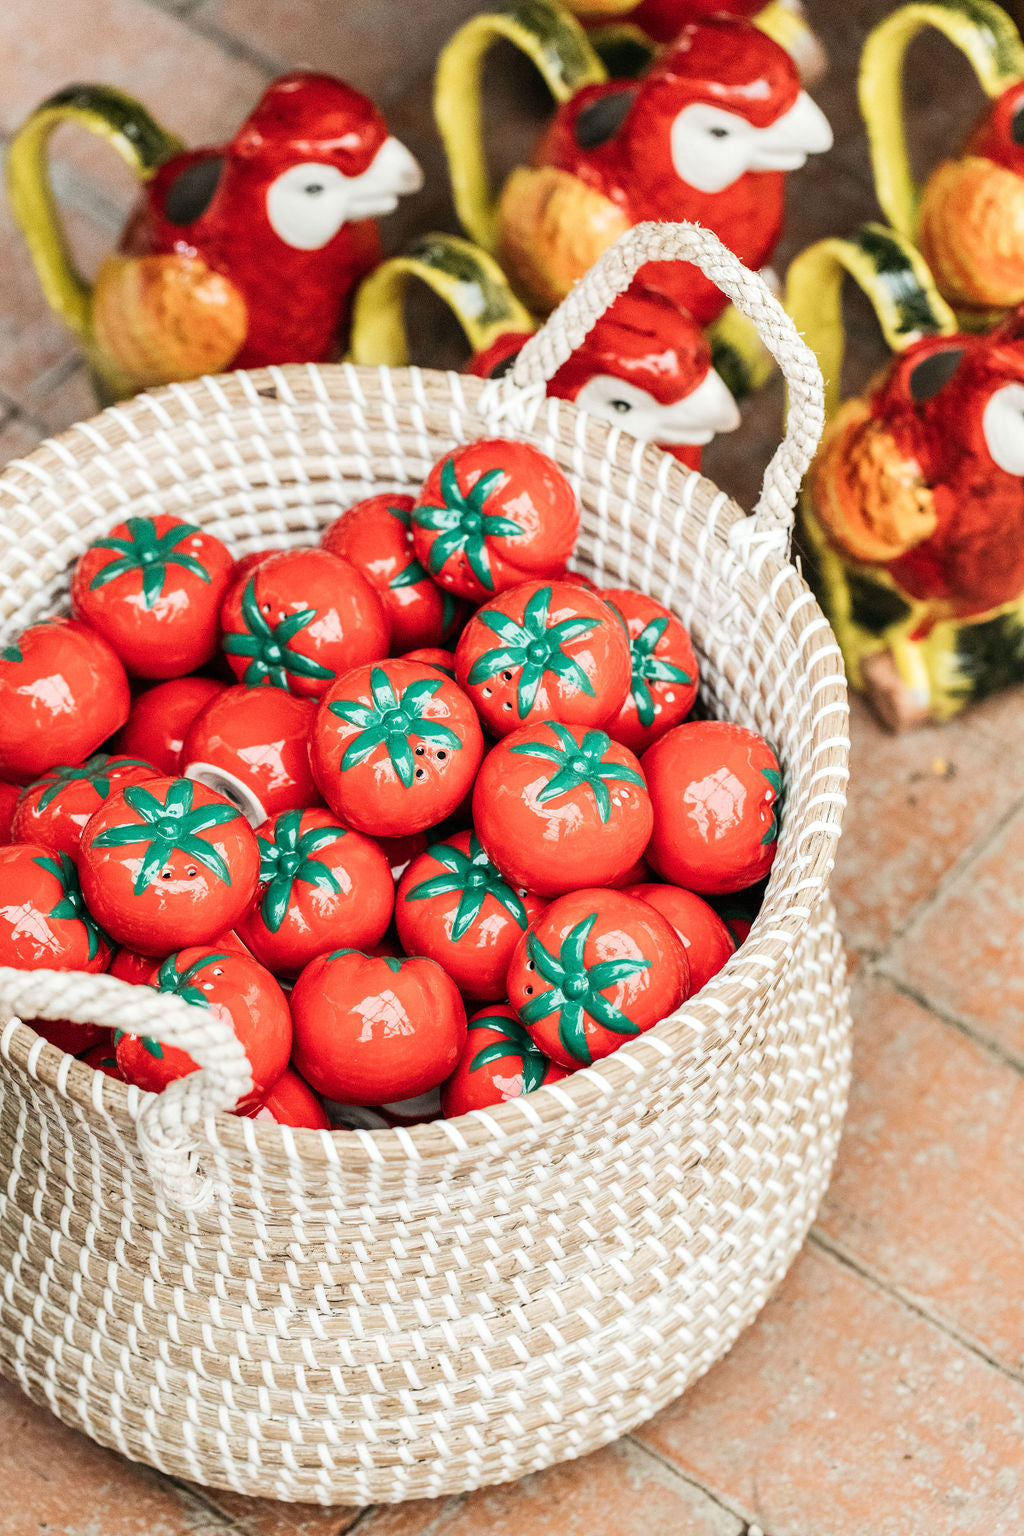 Tomato Salt and Pepper Shakers (Set)